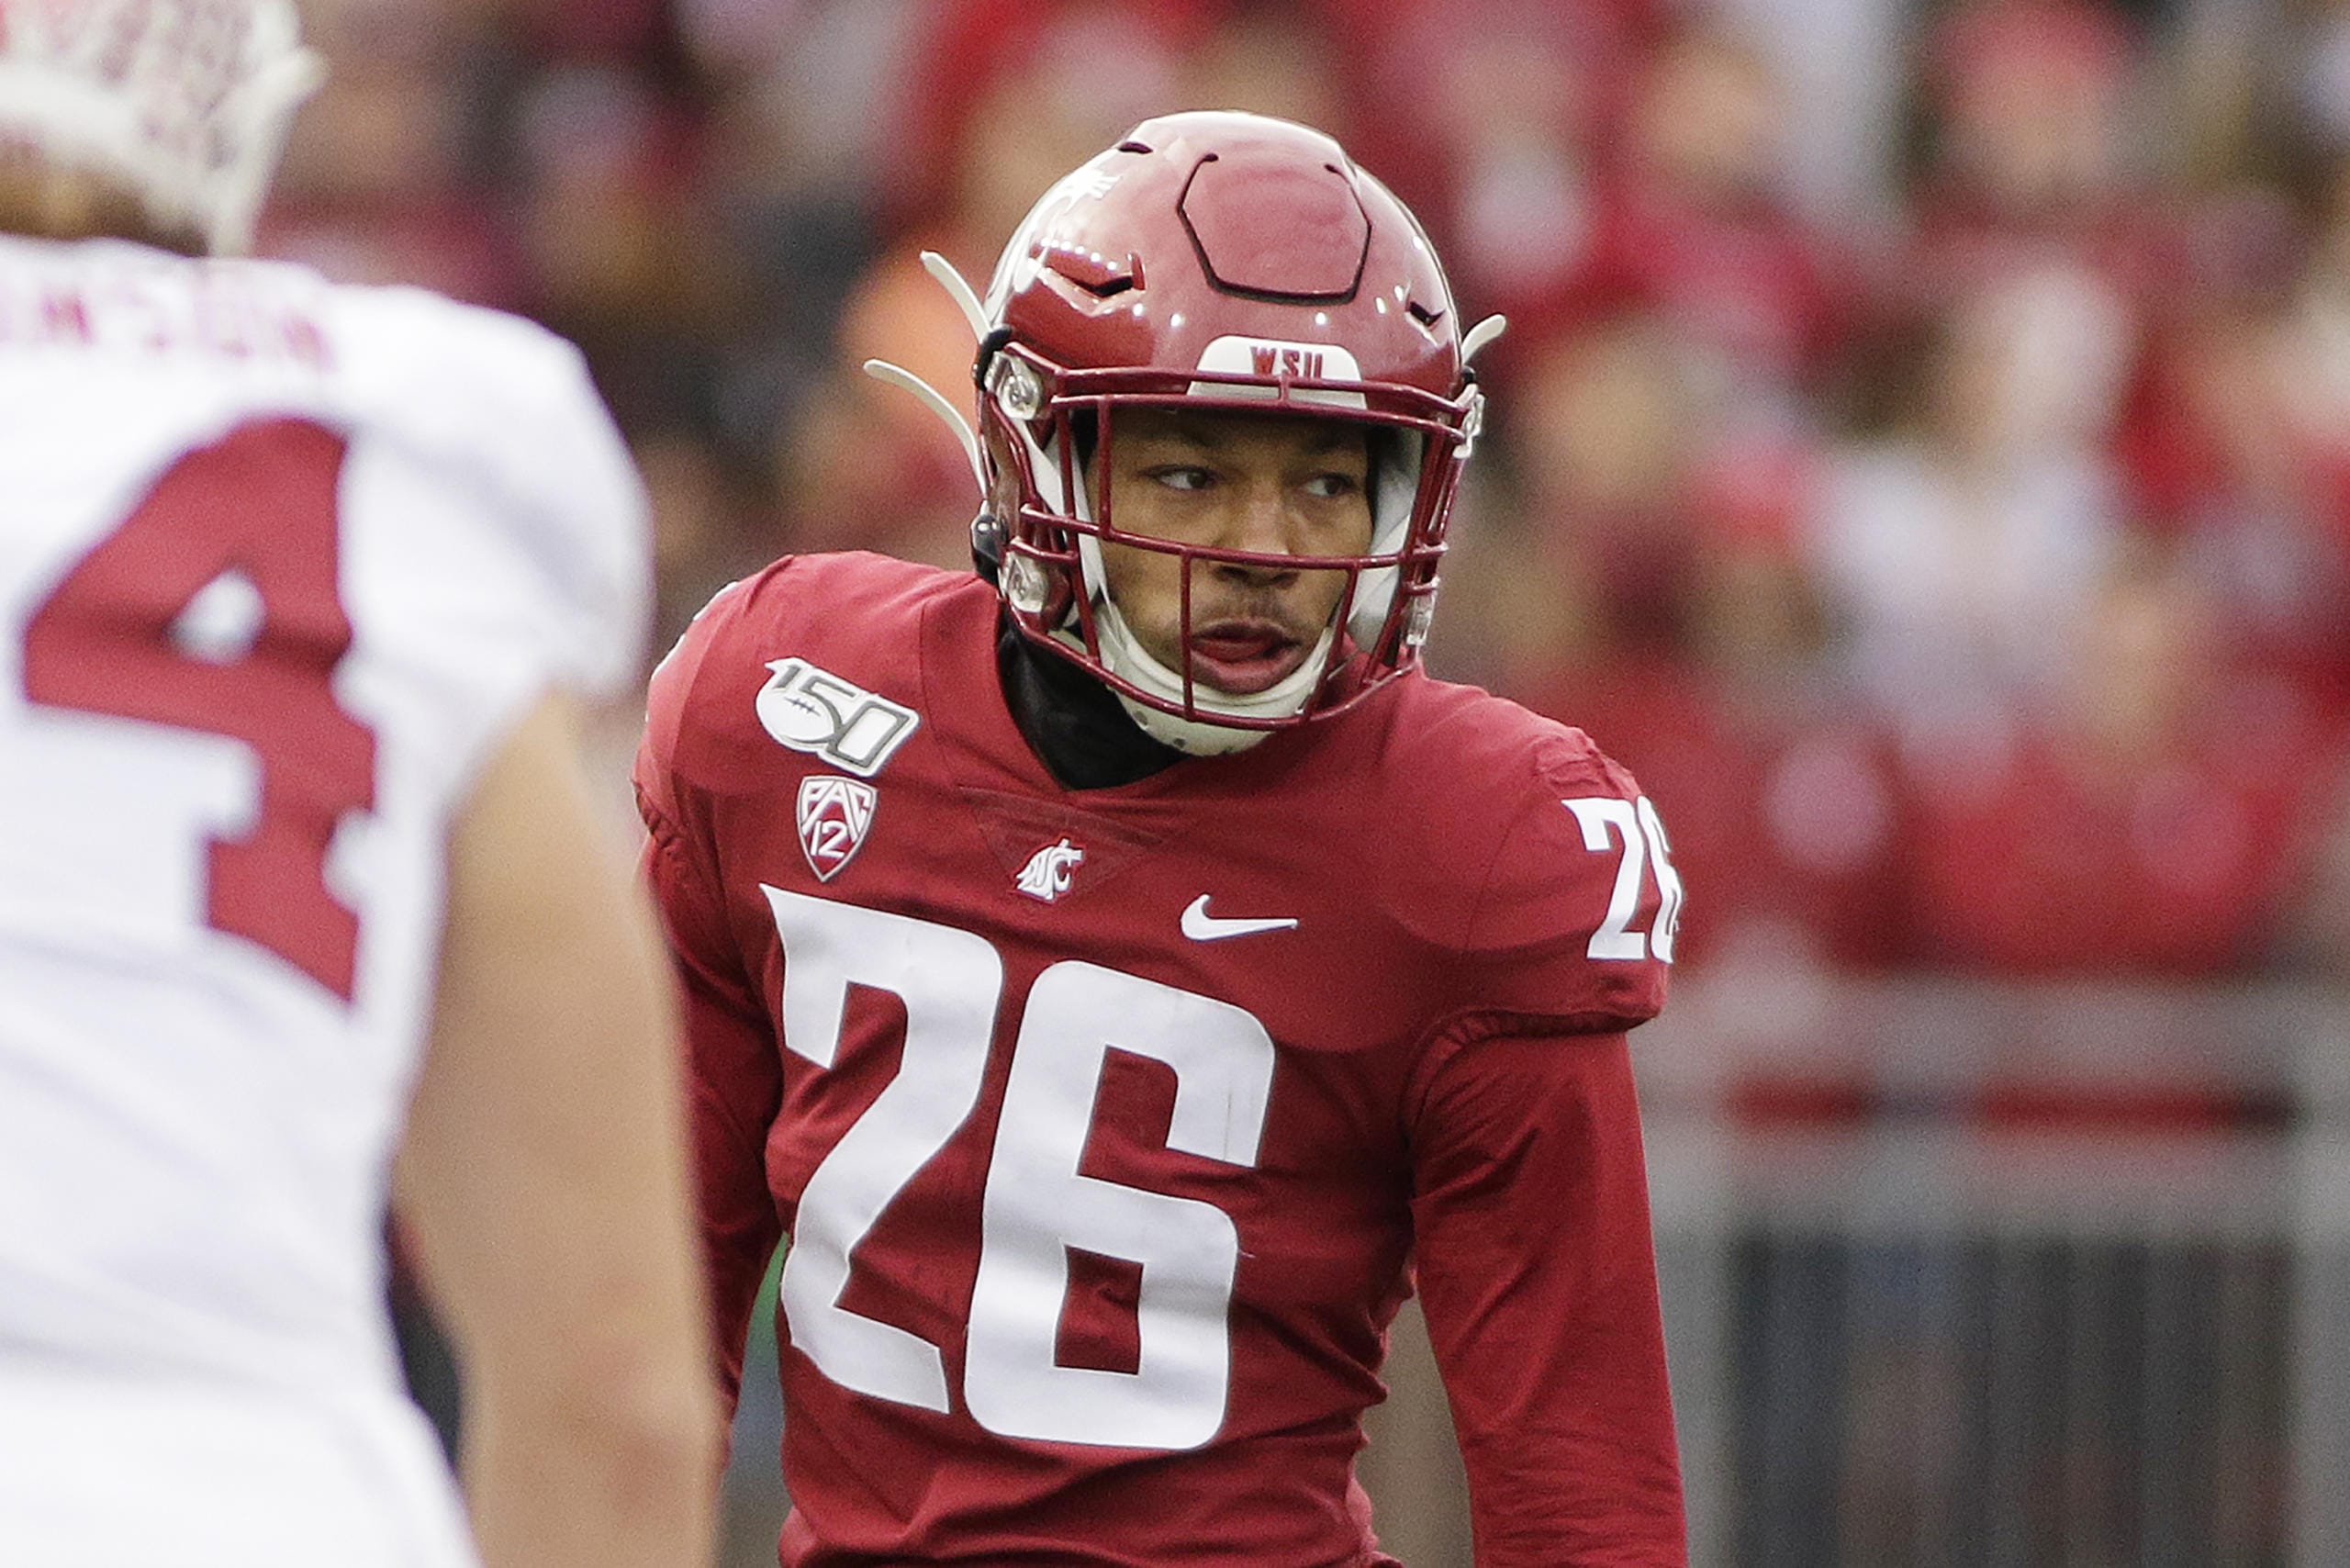 Washington State defensive back Bryce Beekman died on March 25 of acute intoxication, the Whitman County coroner said on Friday, April 24, 2020. Beekman was 22 years old.